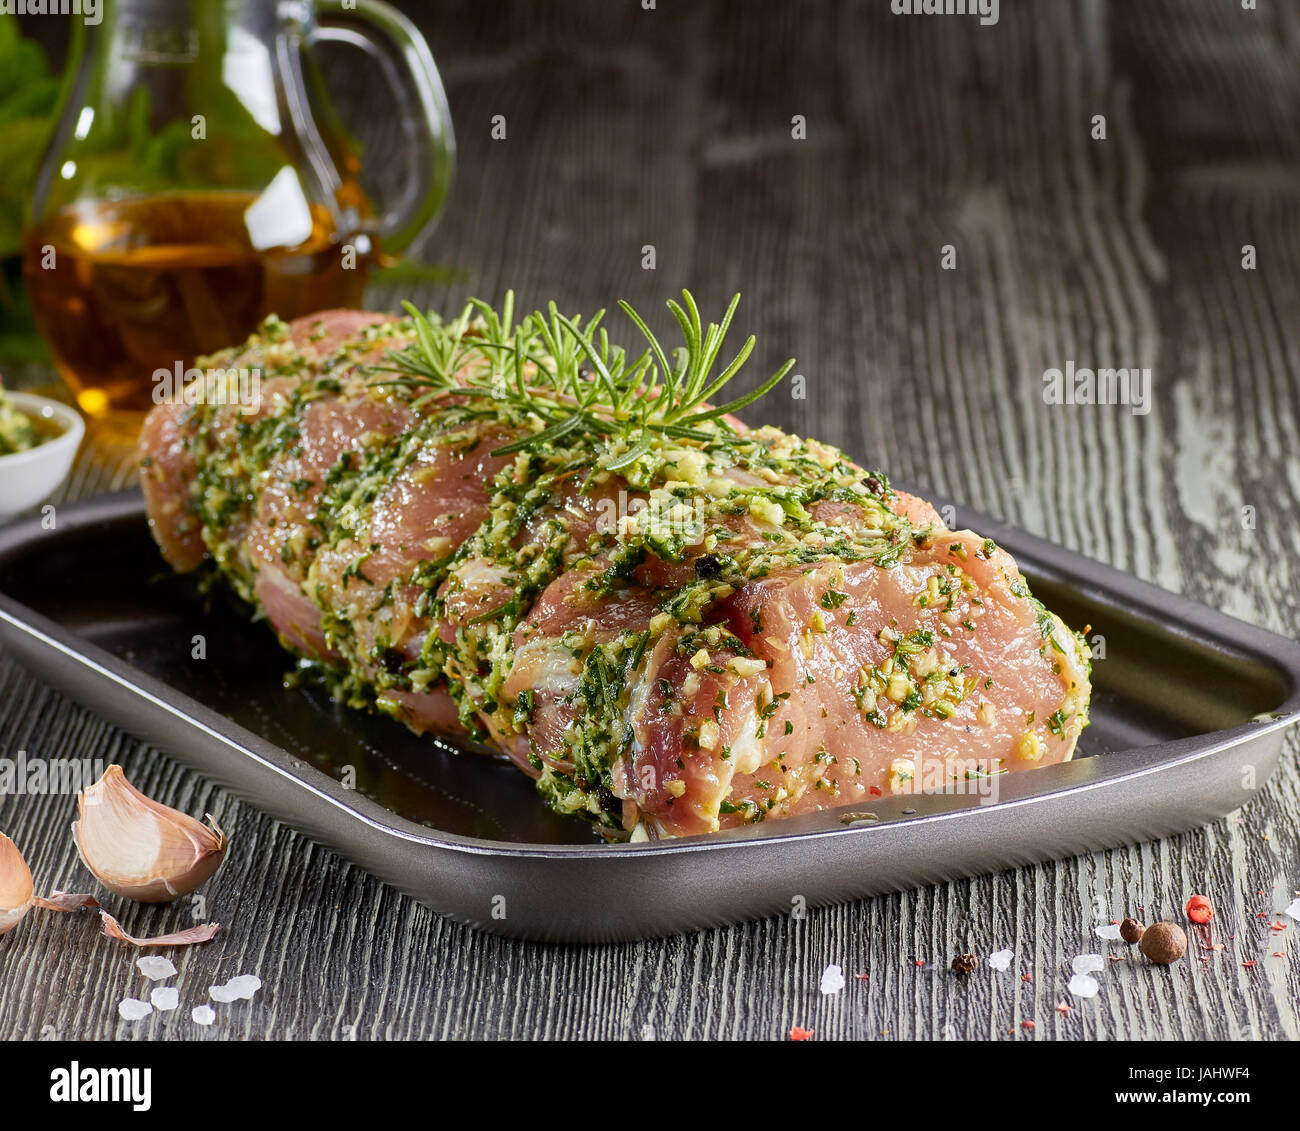 Raw pork loin with spices in baking tray. Stock Photo